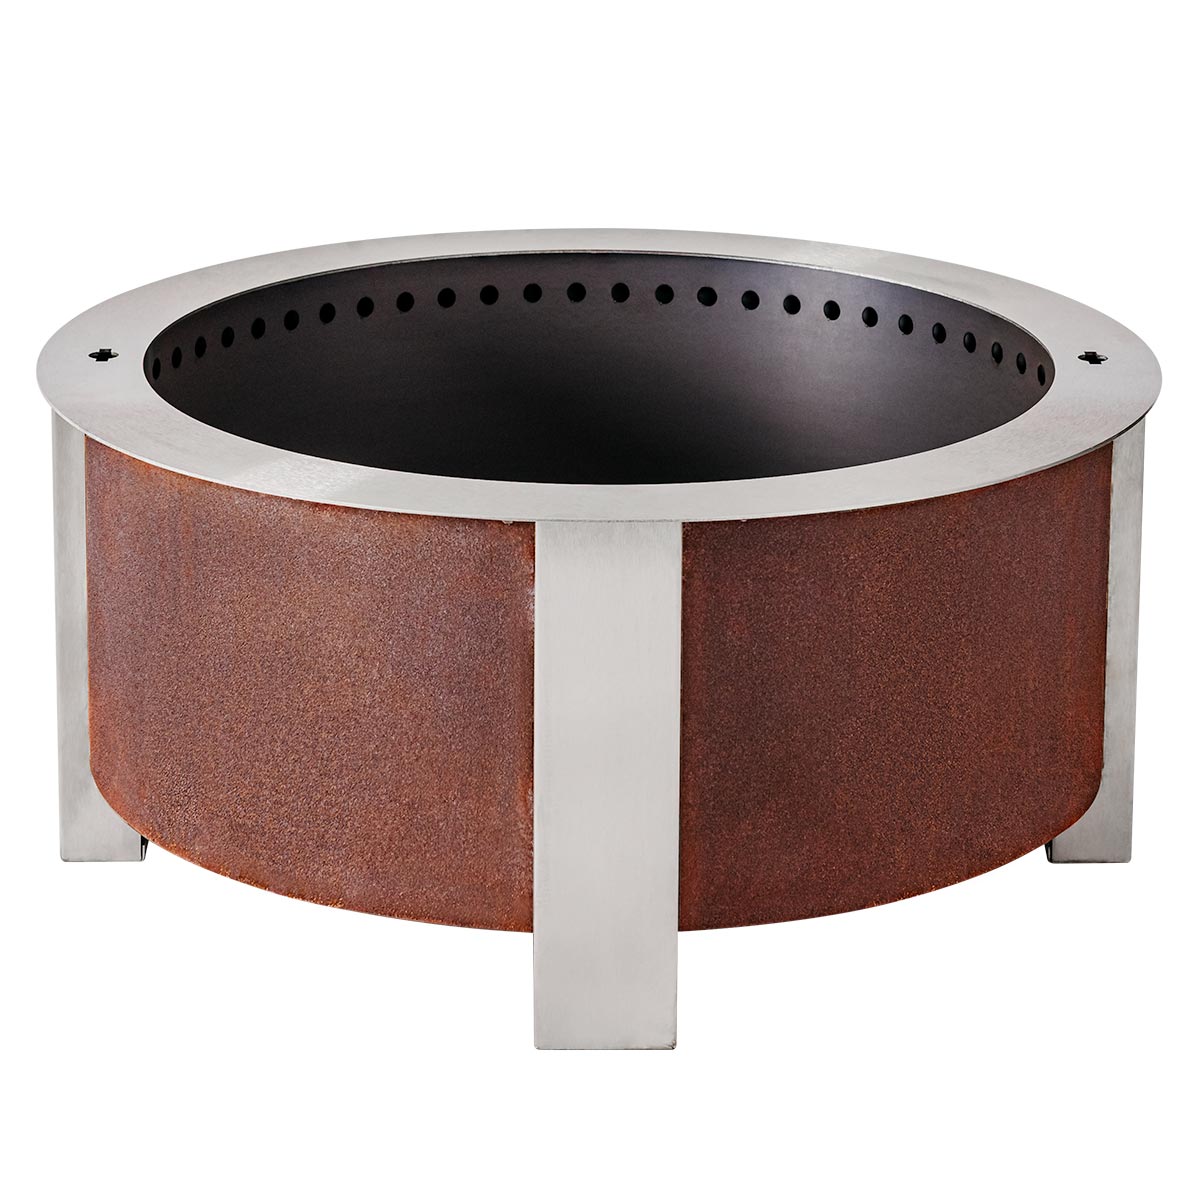 BREEO X Series 30 Smokeless Fire Pit (Patina) with Ash Removal Tool